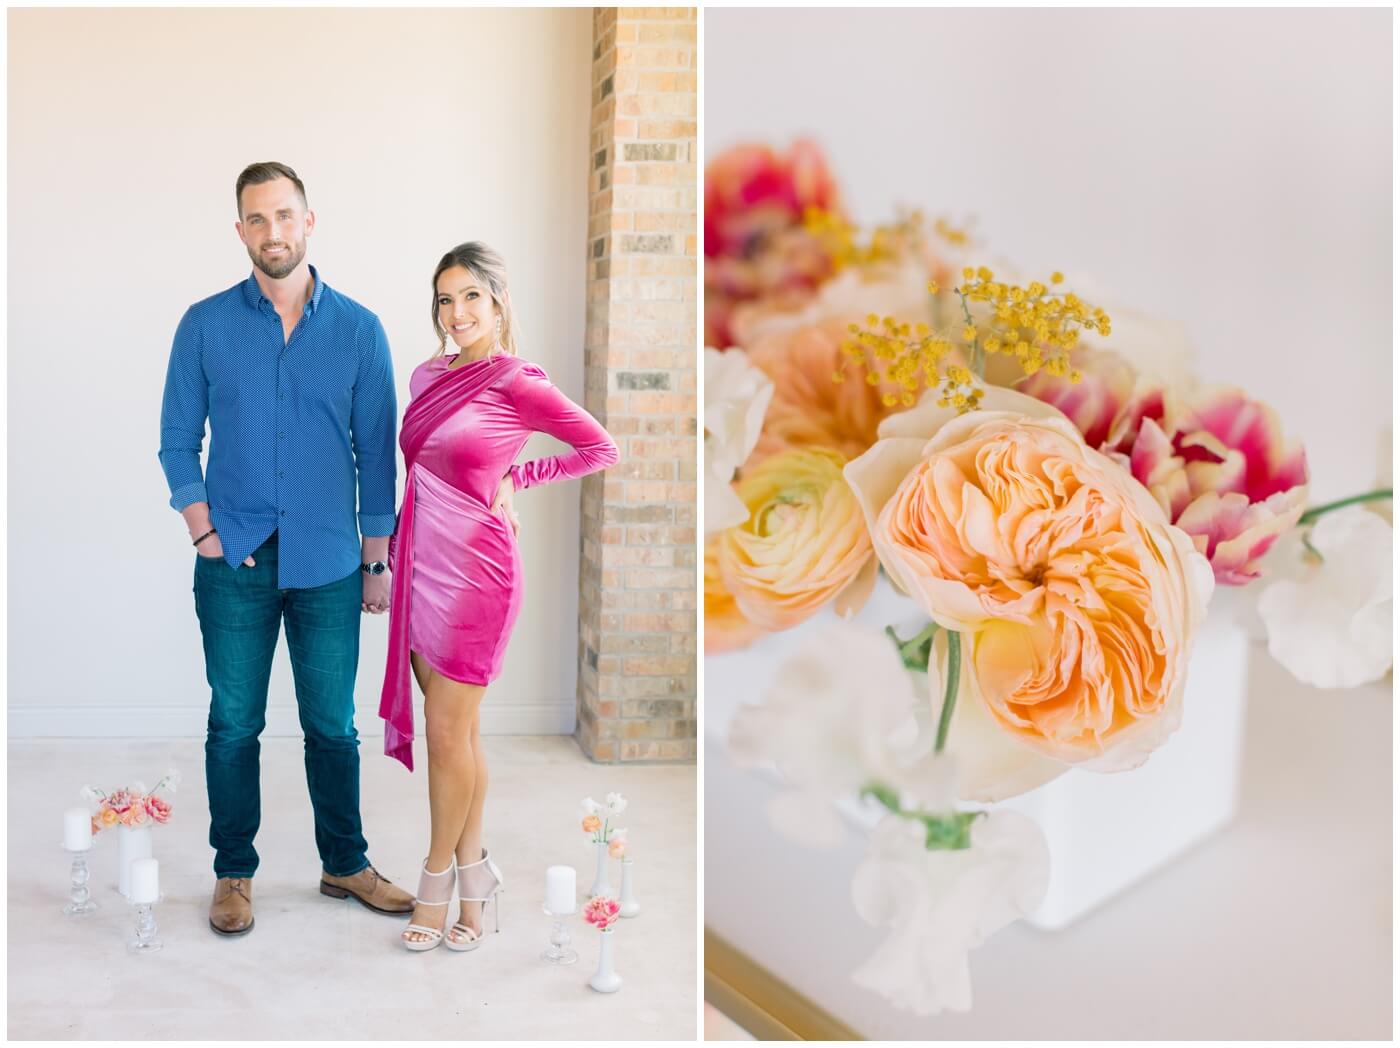 formal outfits for engagement photos | a couple smiles together with beautiful flowers